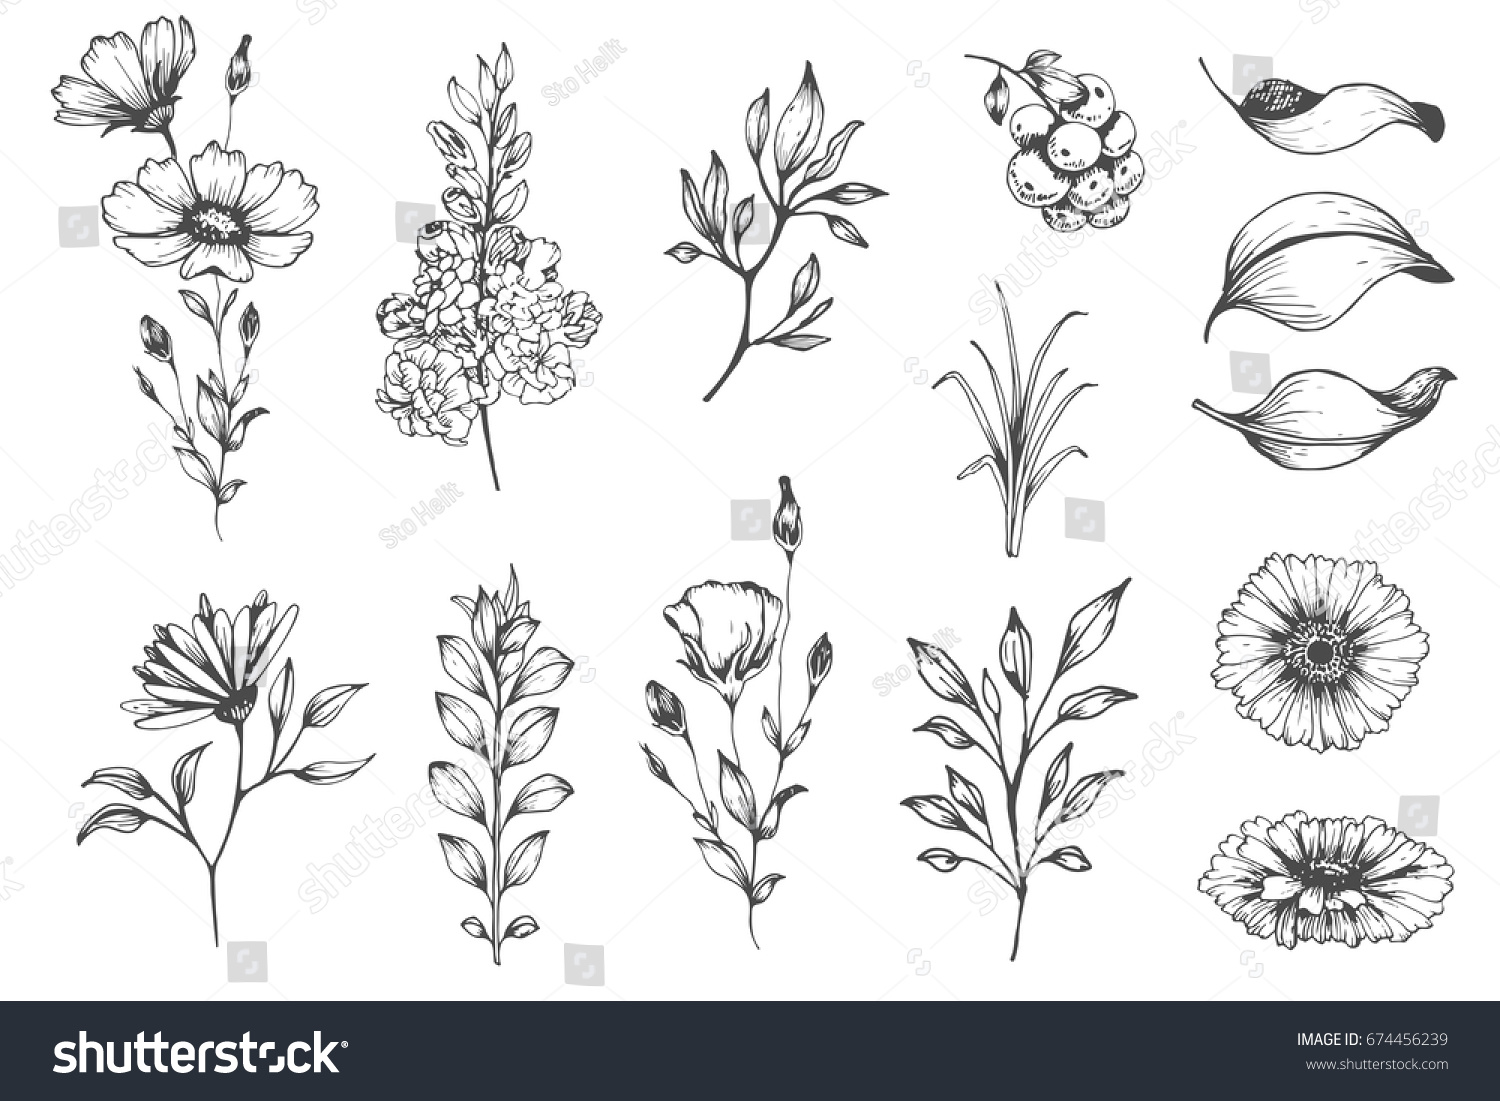 Vector collection of hand drawn plants. Botanical set of sketch flowers and branches. #674456239